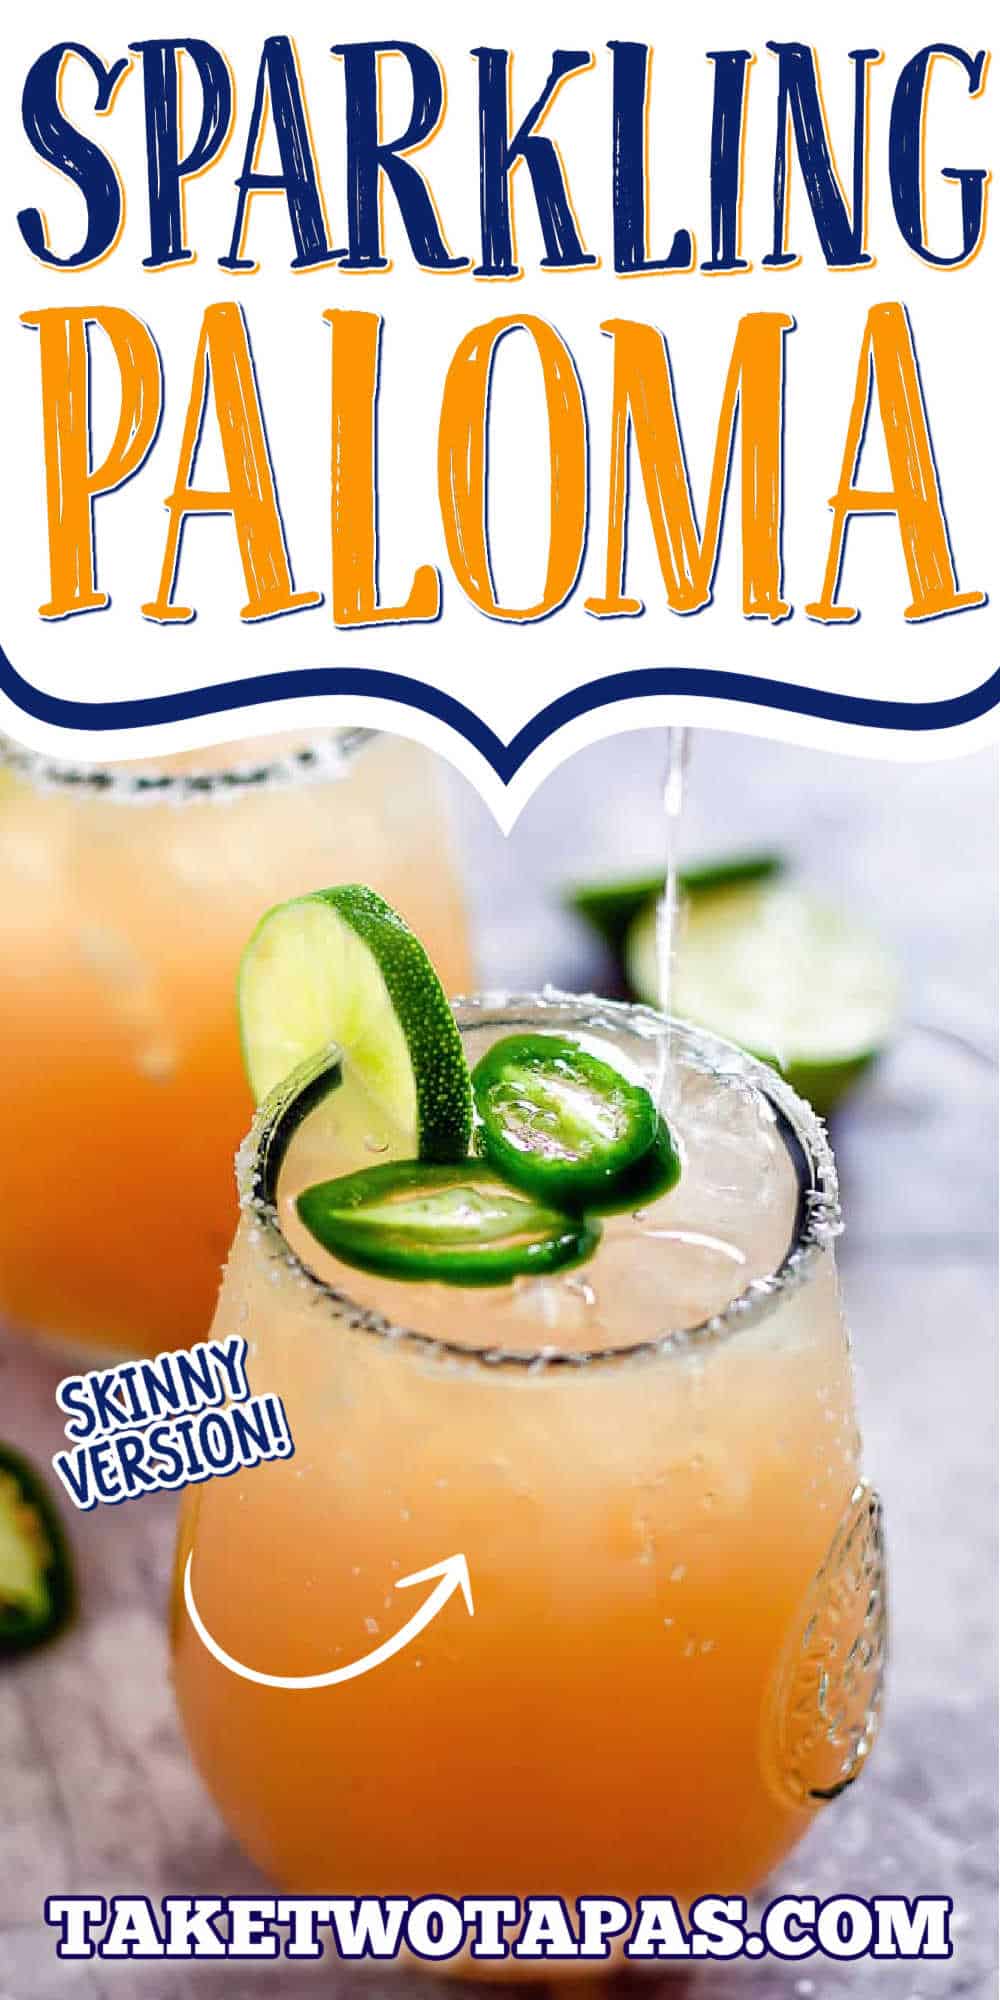 https://www.taketwotapas.com/wp-content/uploads/2018/07/Spicy-Paloma-Pin.jpg